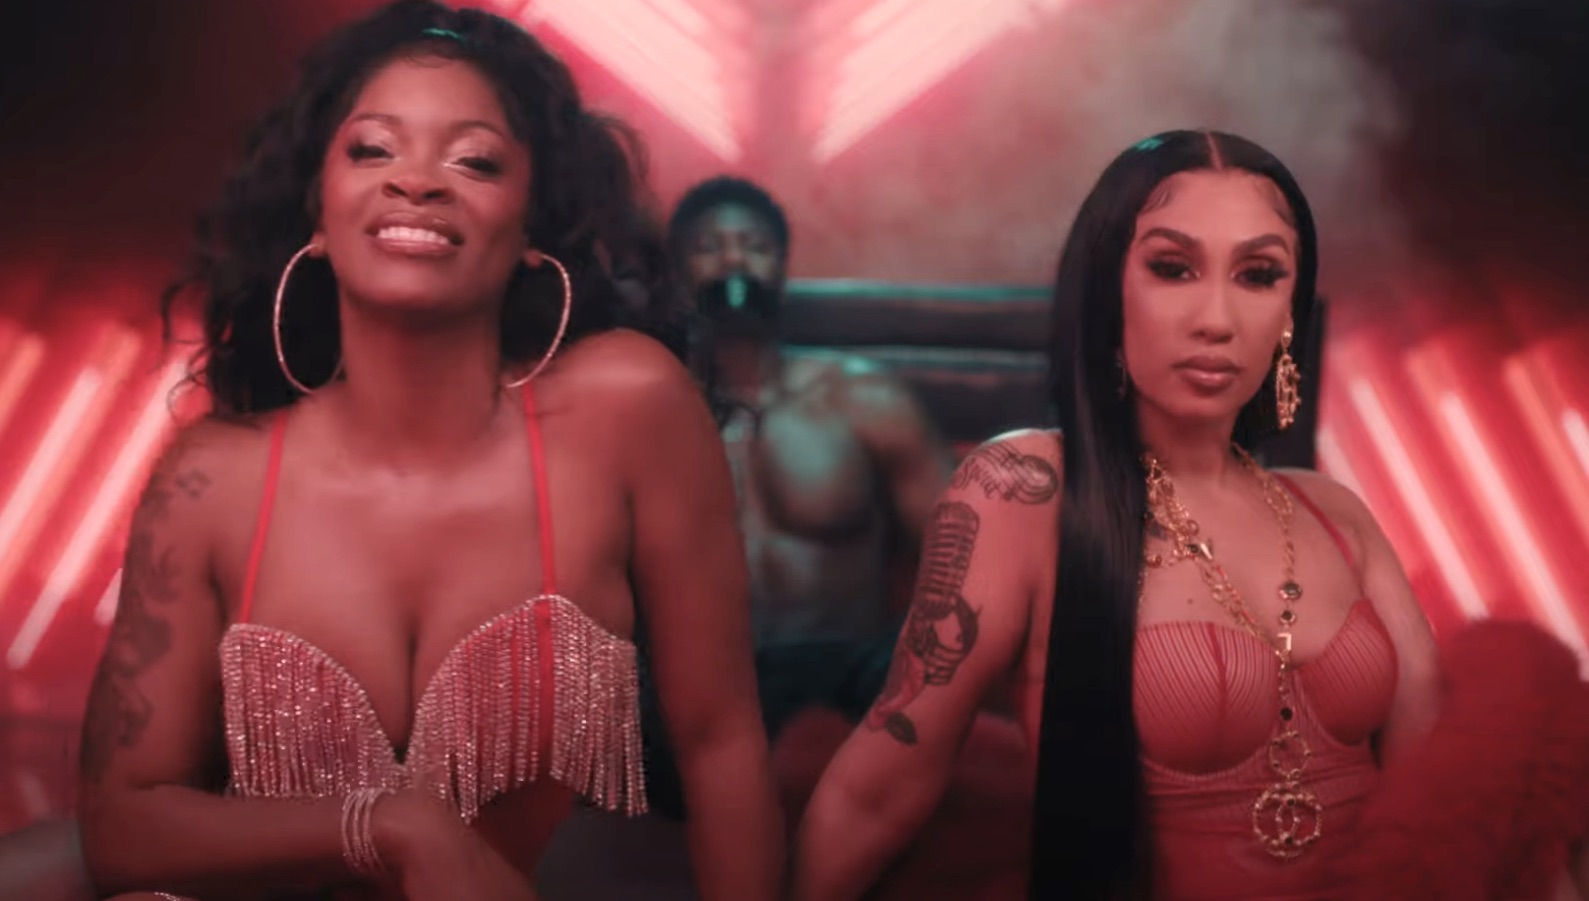 Queen Naija and Ari Lennox have unleashed the video for their new collabora...